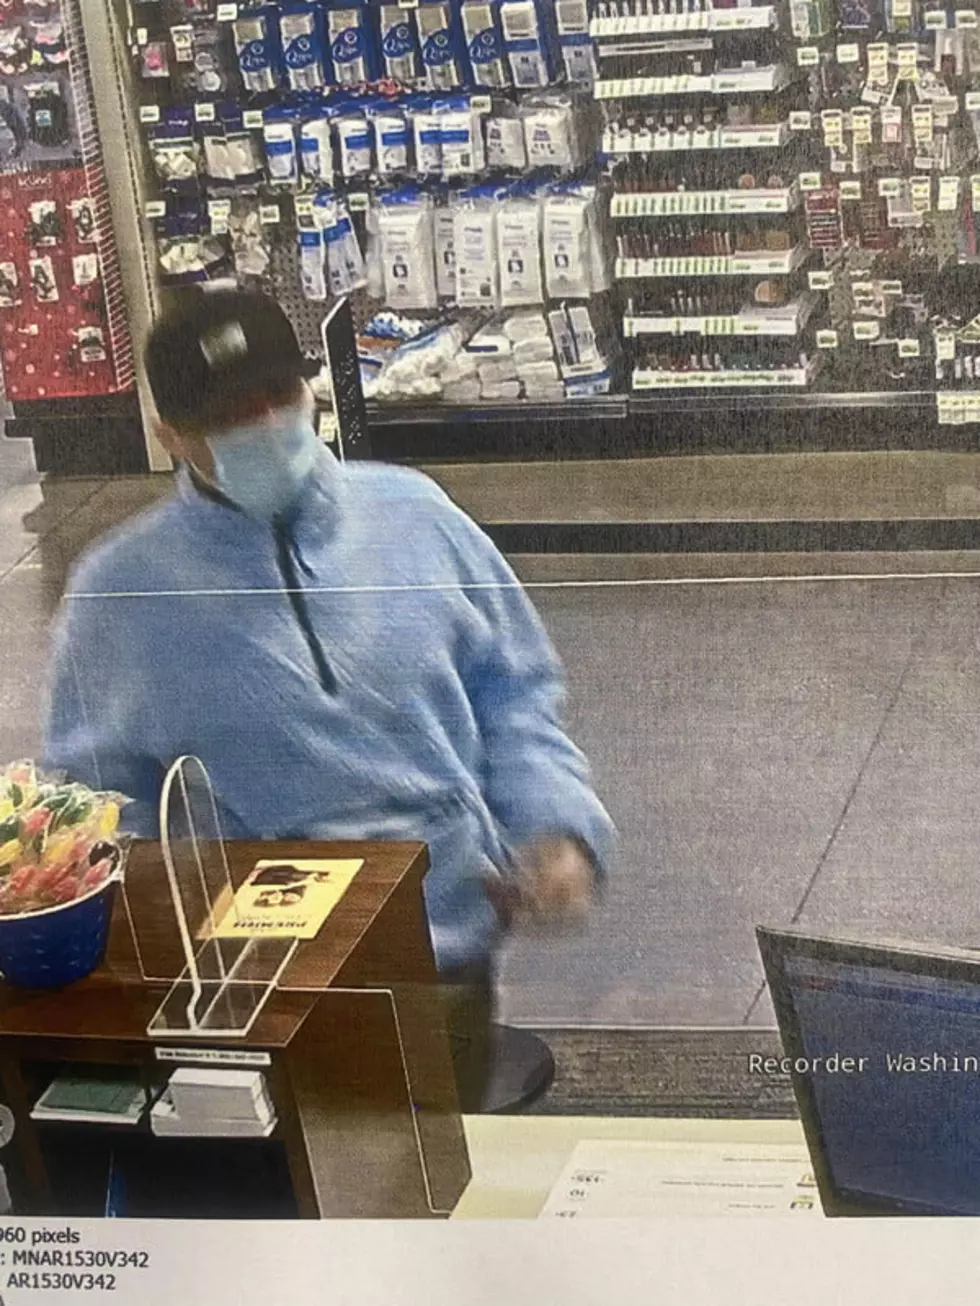 St. George PD asks for help after robbery